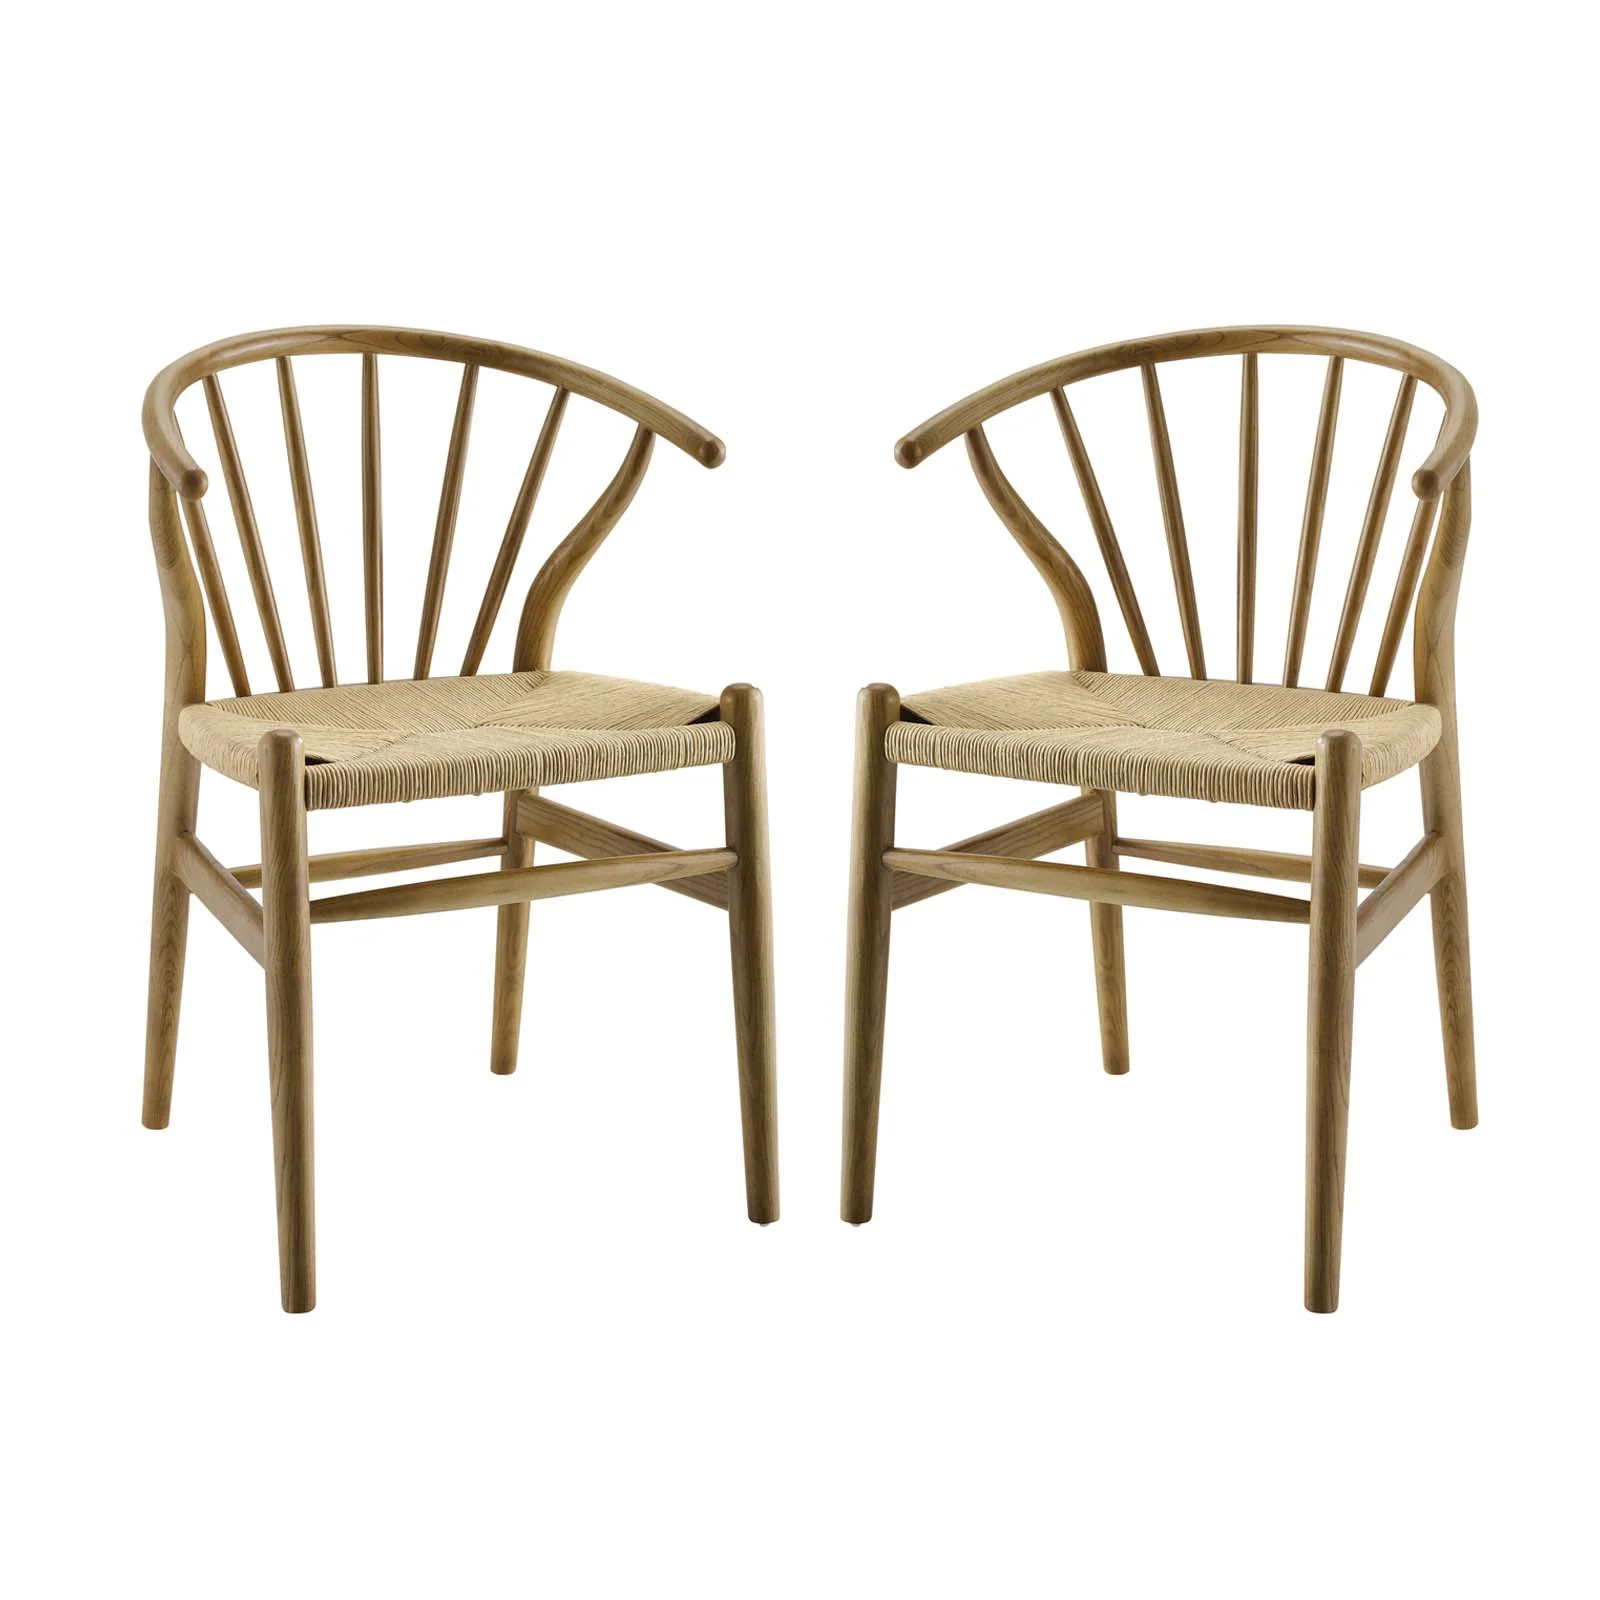 Modway Flourish Spindle Wood Dining Side Chair Set of 2 in Natural - image 1 of 4